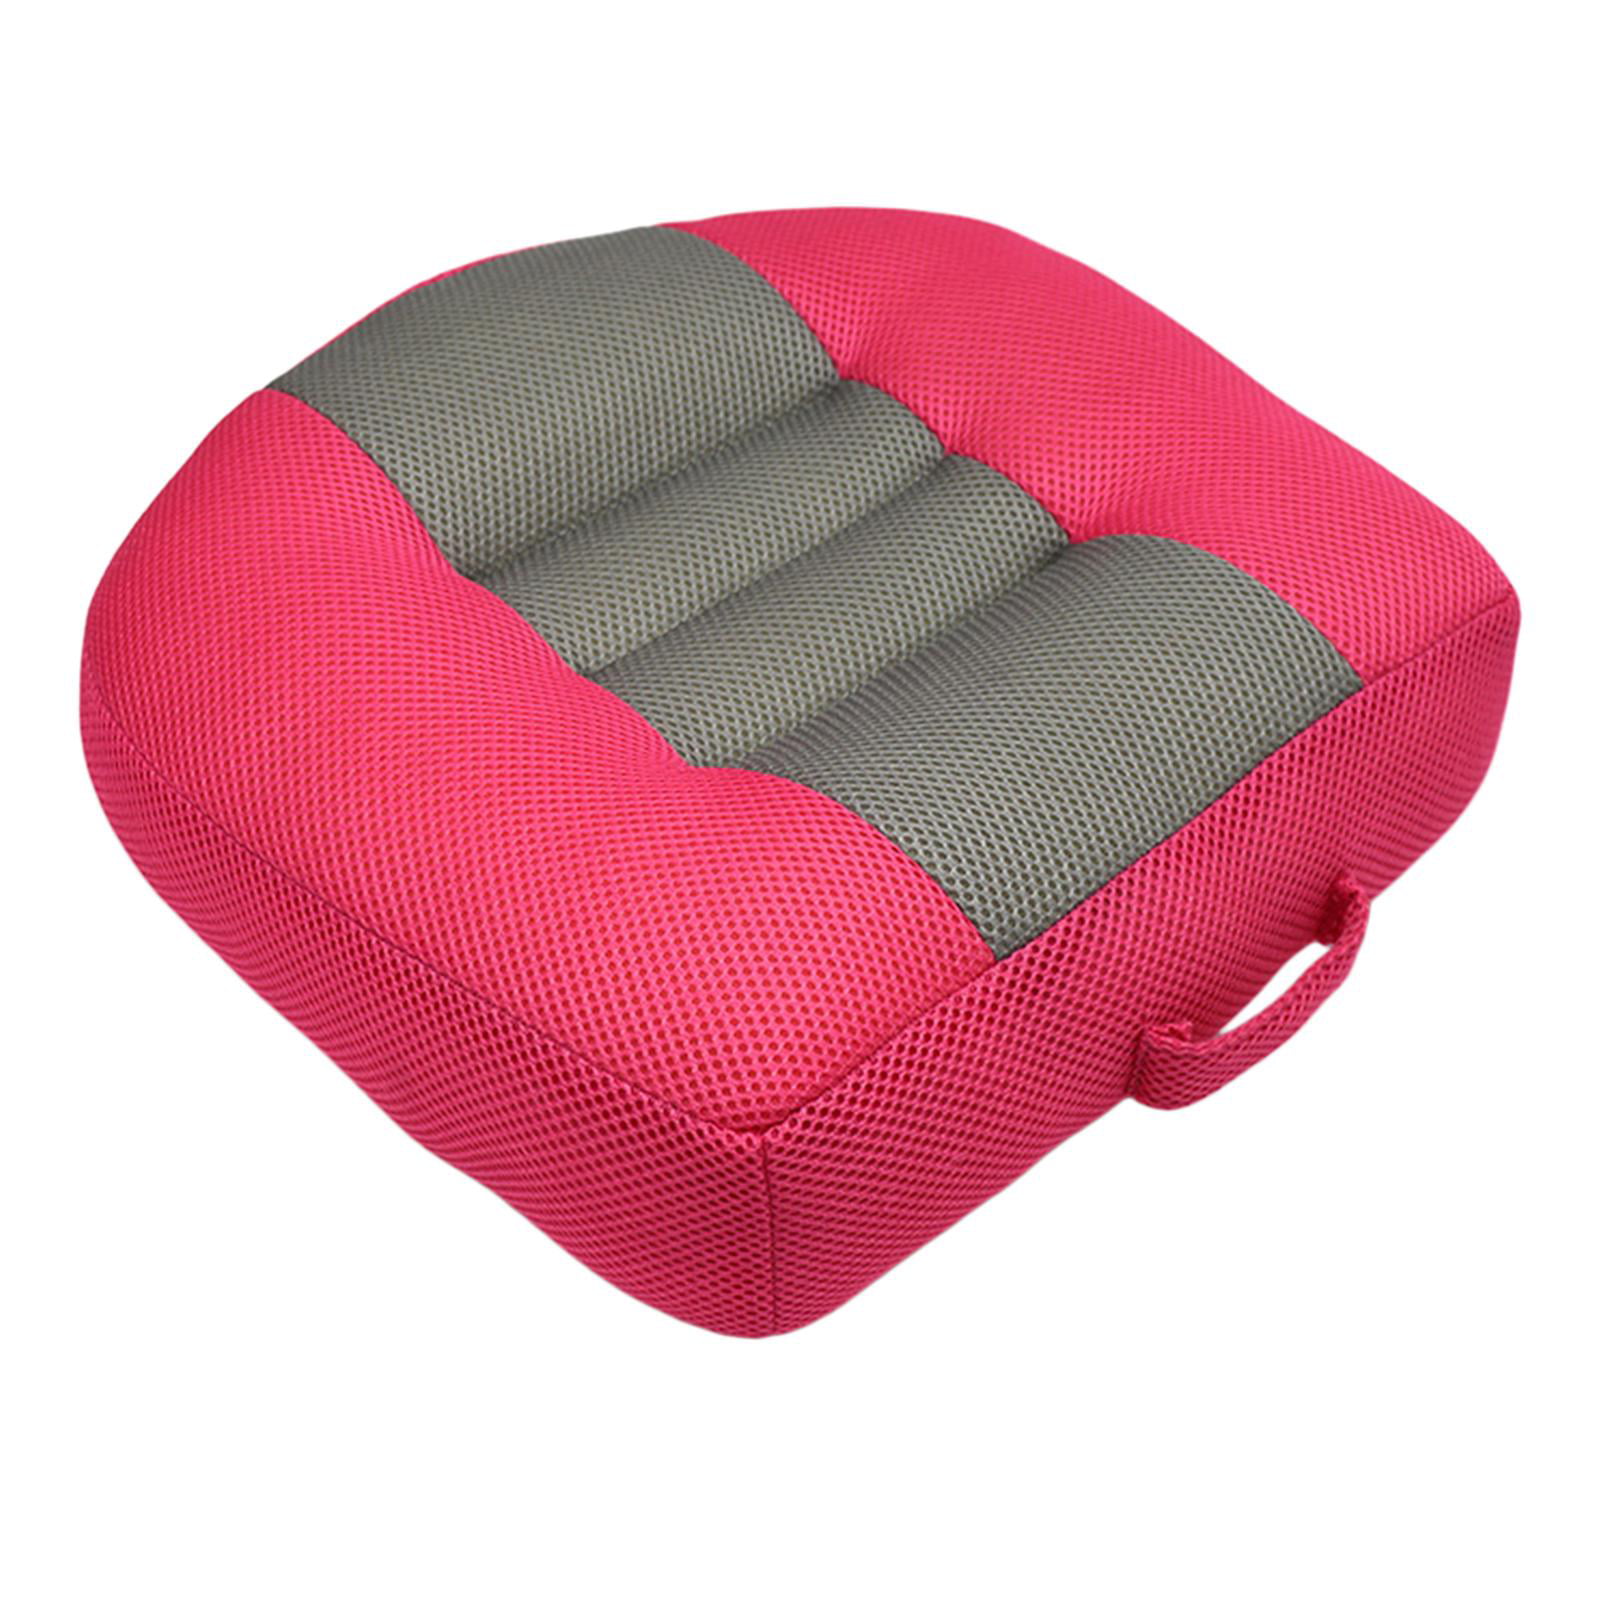 PeiBan Adult Booster Seat for Car, Portable Booster Seat for Driver, Passenger , 3D Breathable Mesh Non-Slip Seat Cushions with Practical Handle for The